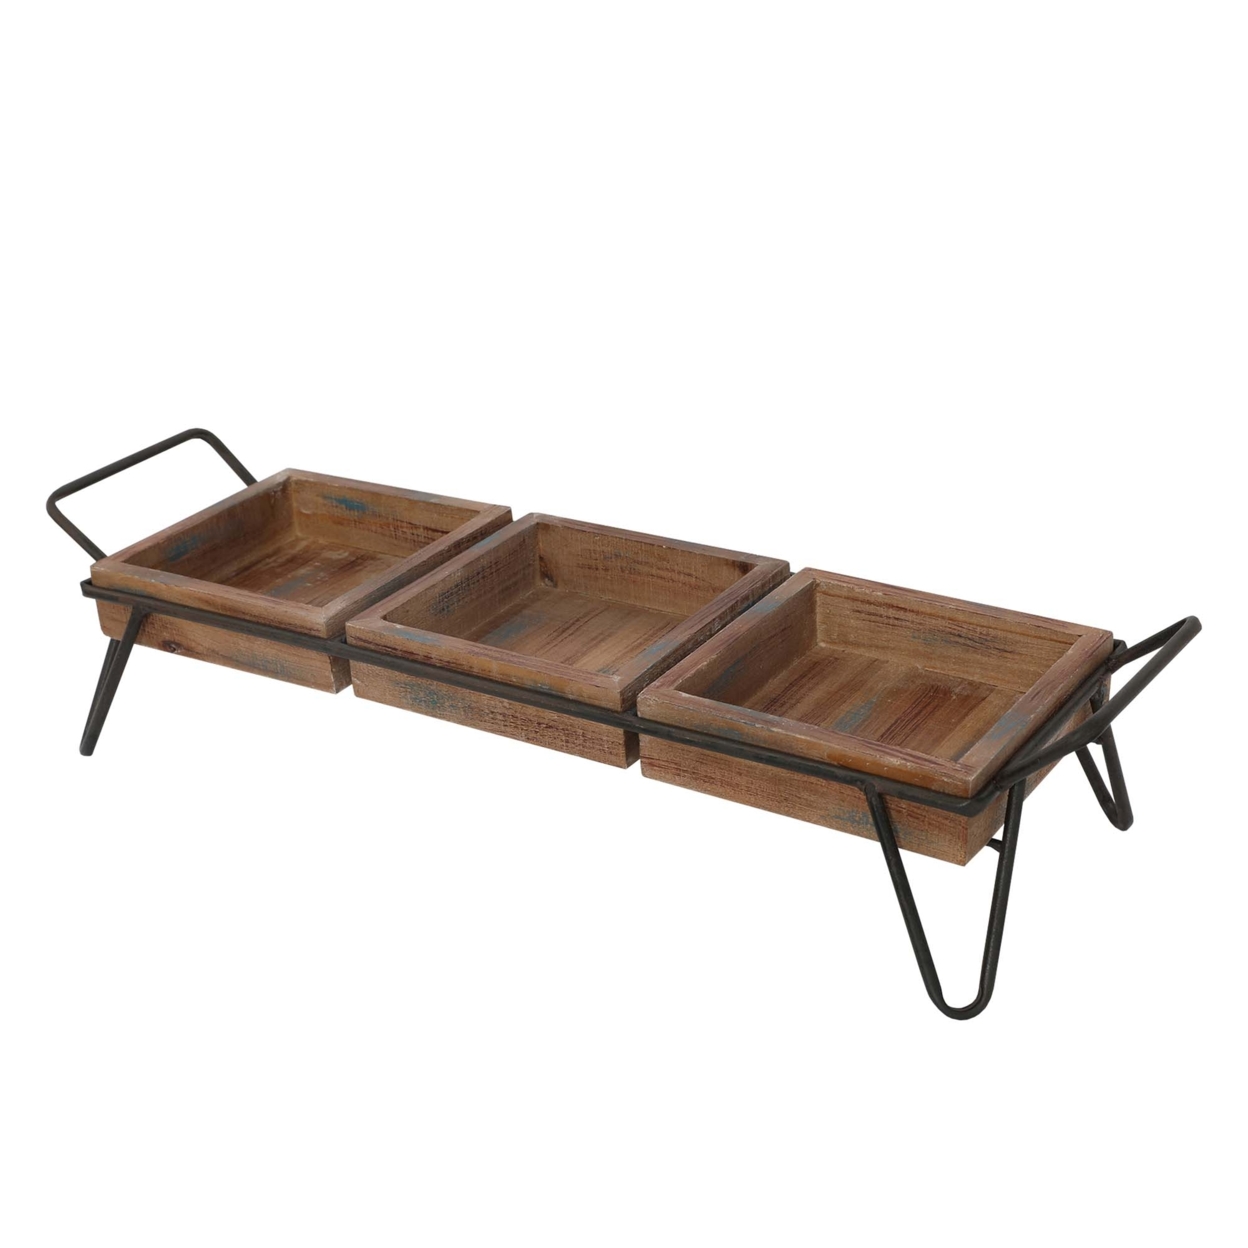 Decorative Serving Tray With 3 Segregated Cubbies And Metal Base, Brown,Saltoro Sherpi